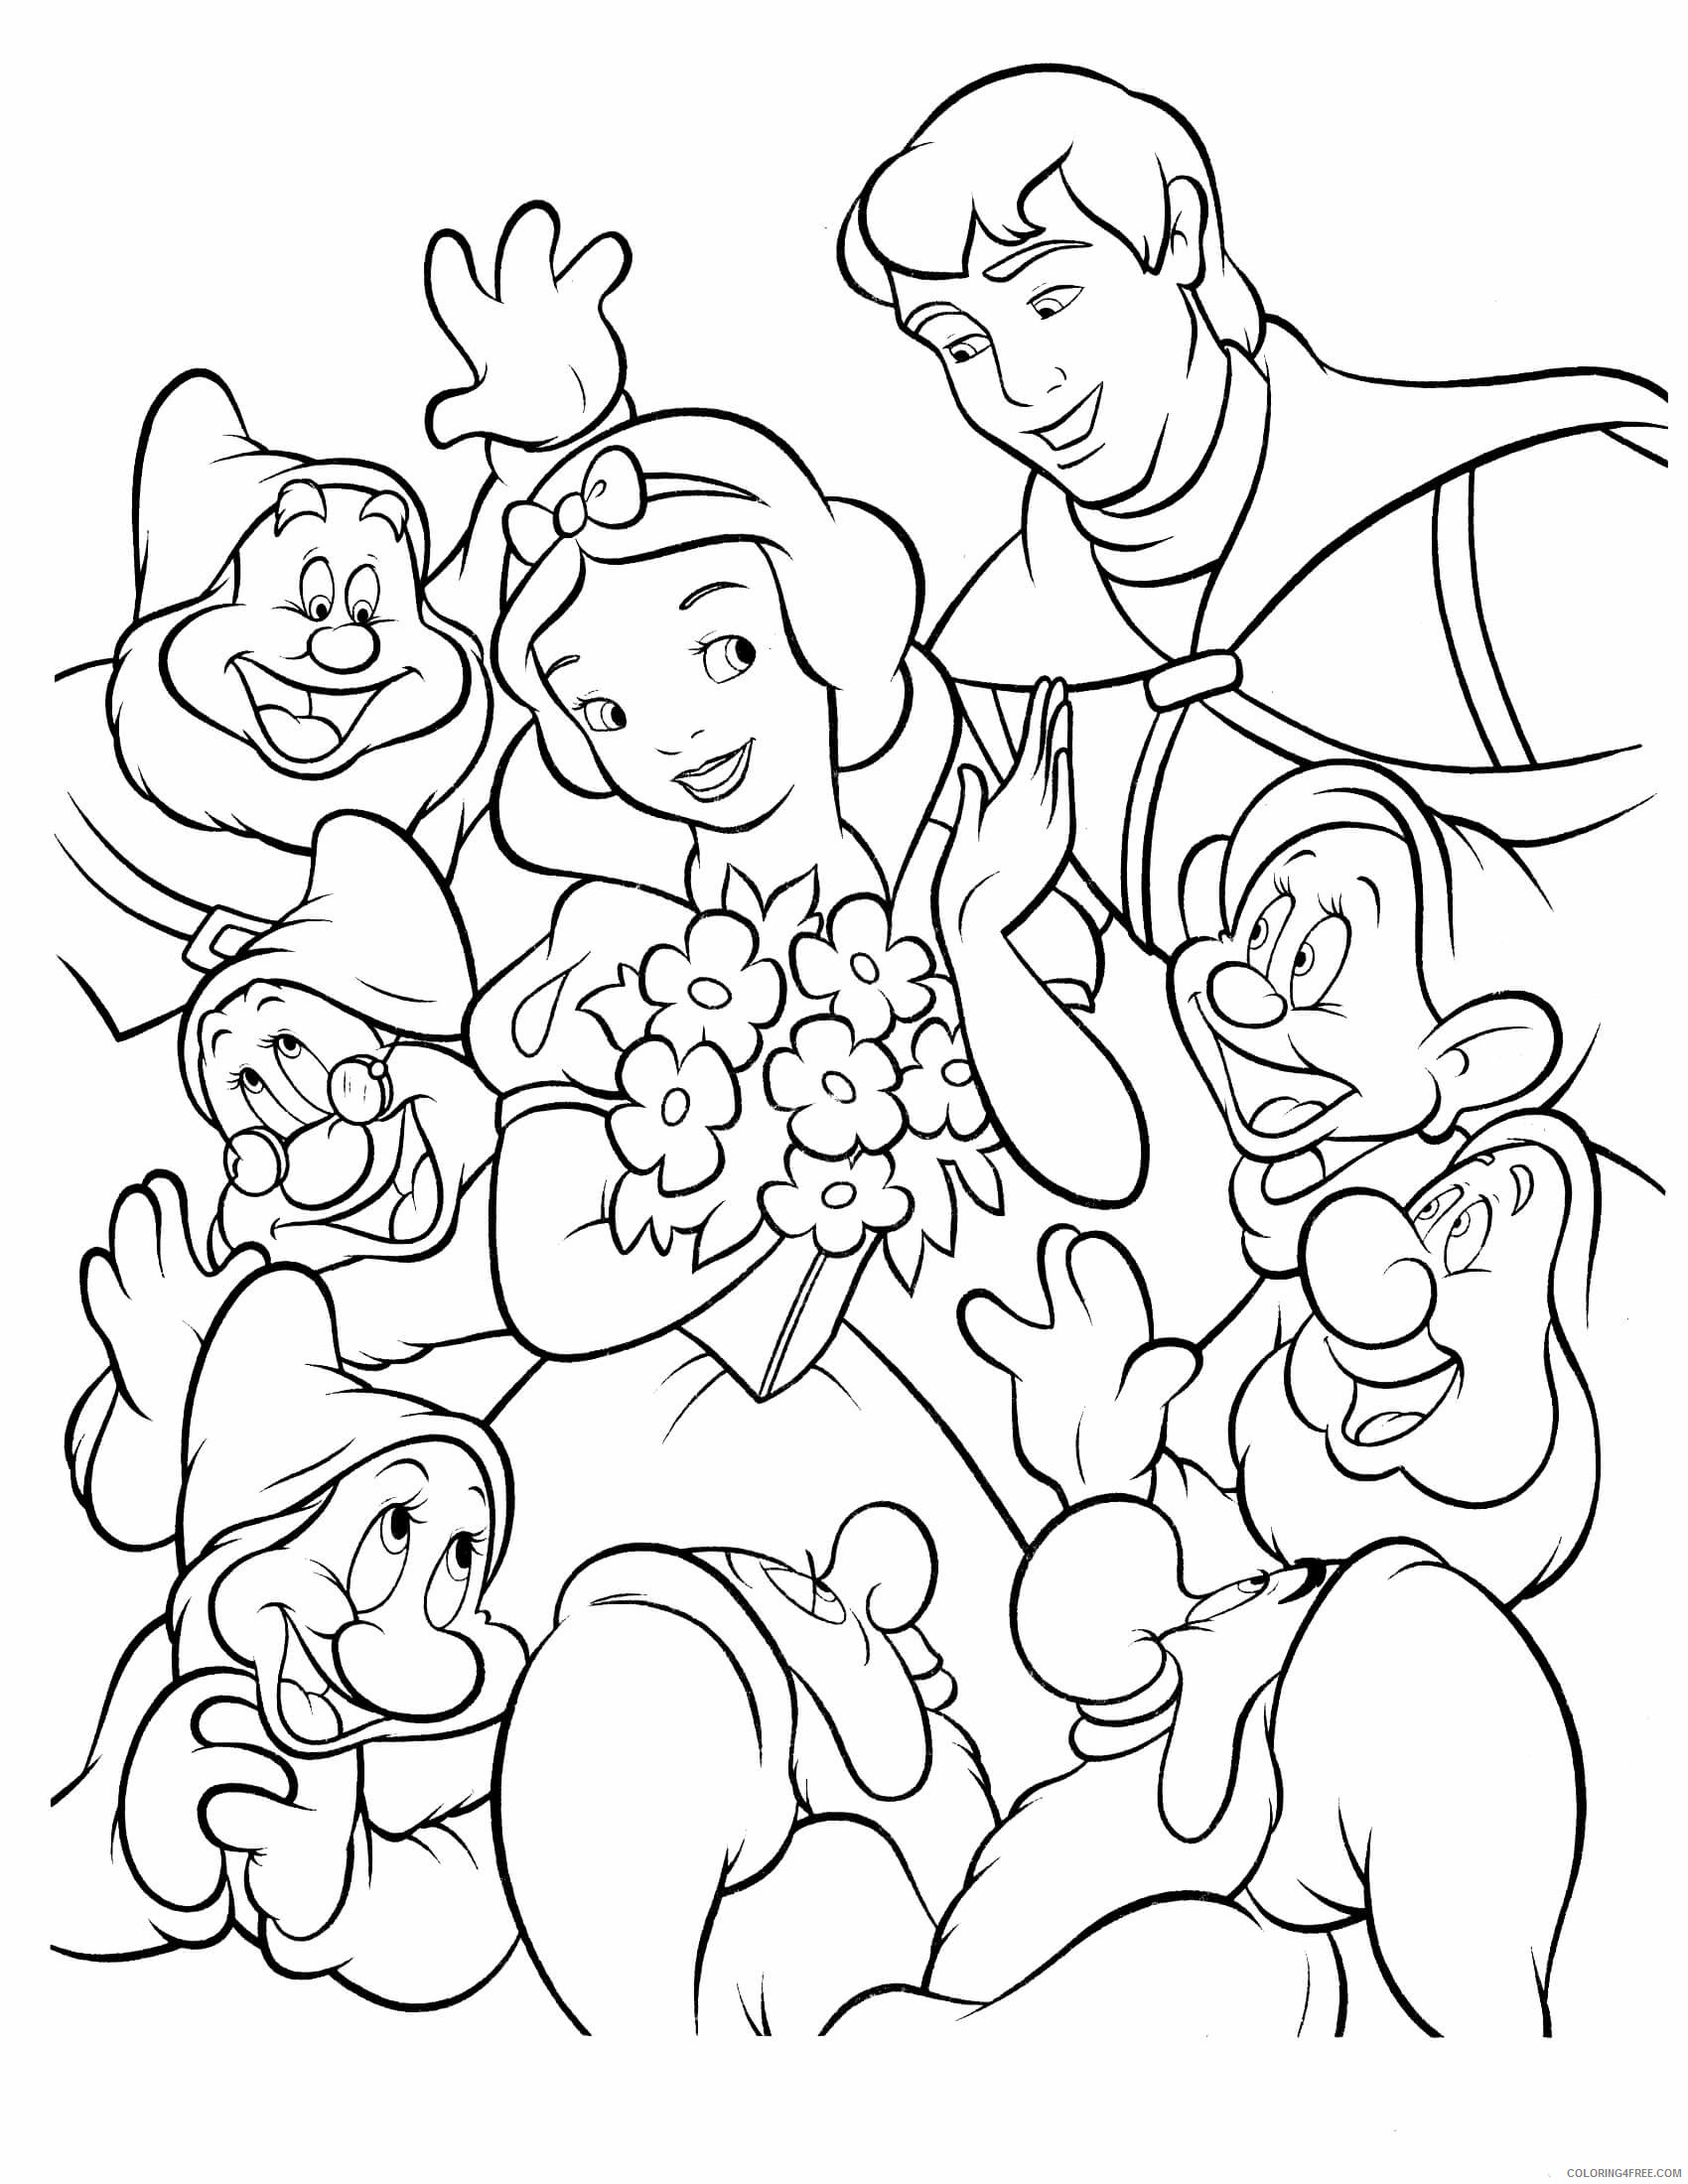 Snow White Coloring Pages Cartoons Snow Whites Printable 2020 5806 Coloring4free